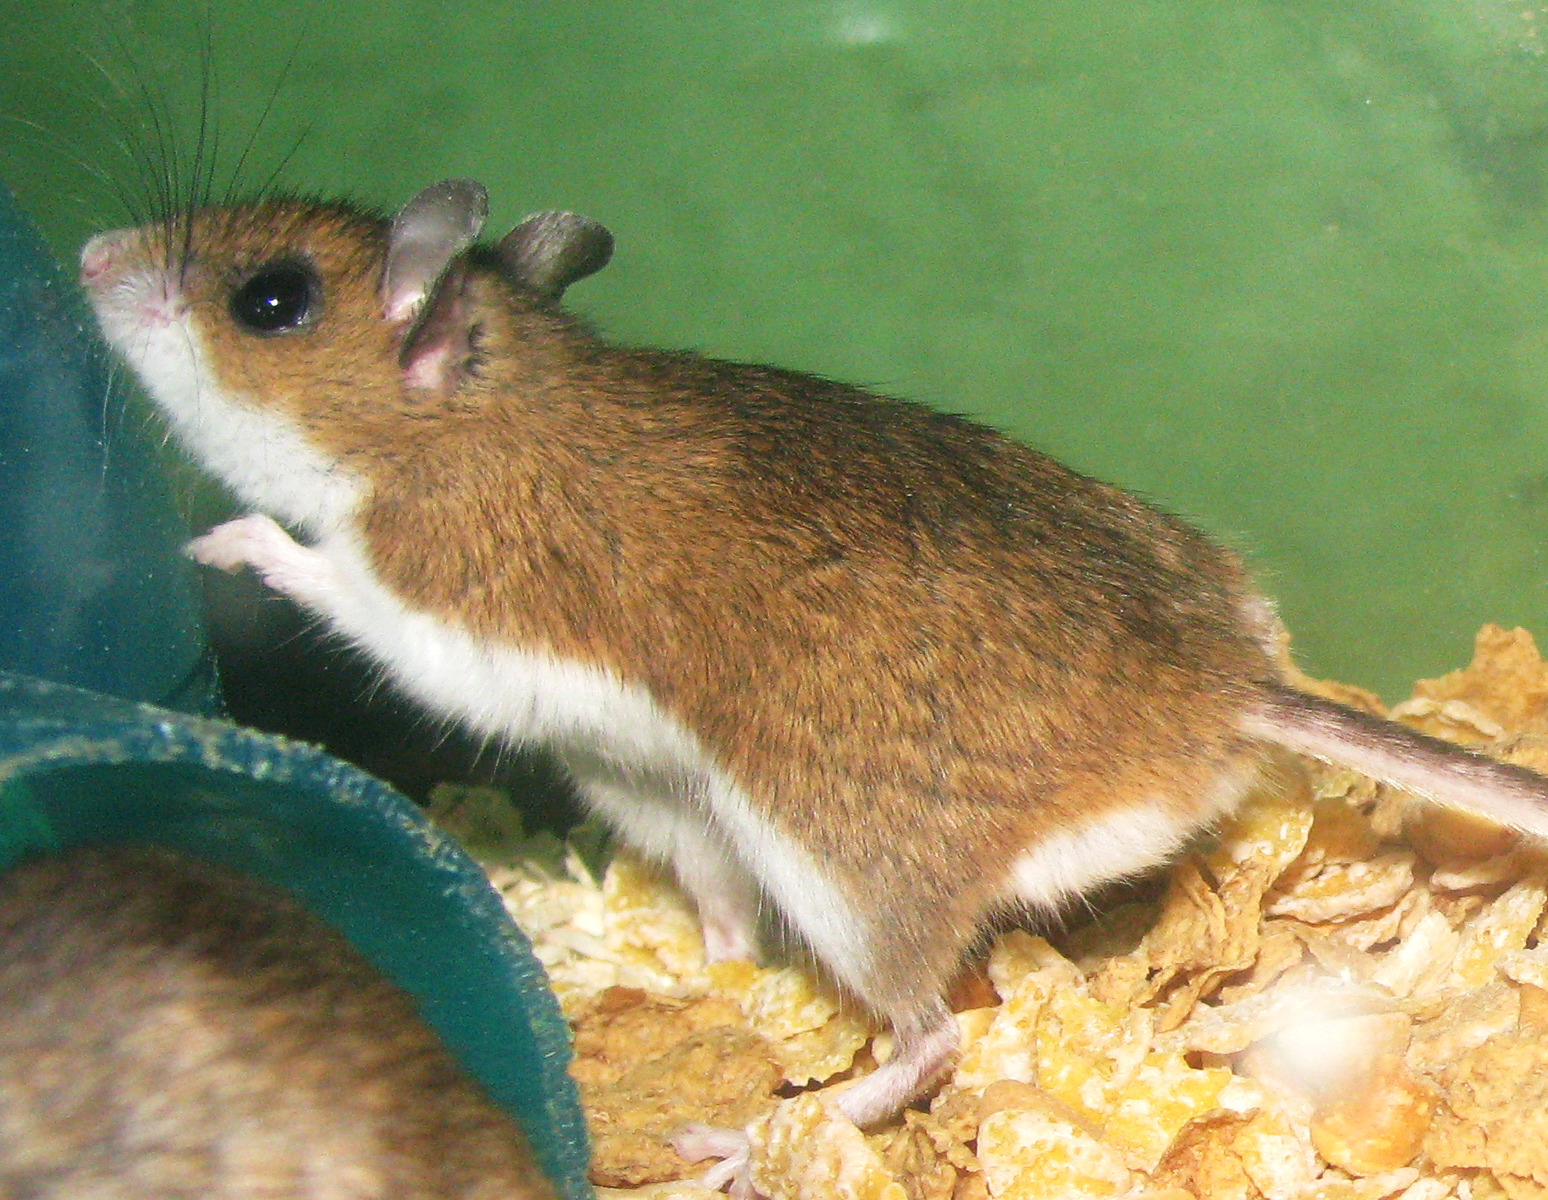 Brown furry mouse with black eyes, white underside and long, coarse whiskers.